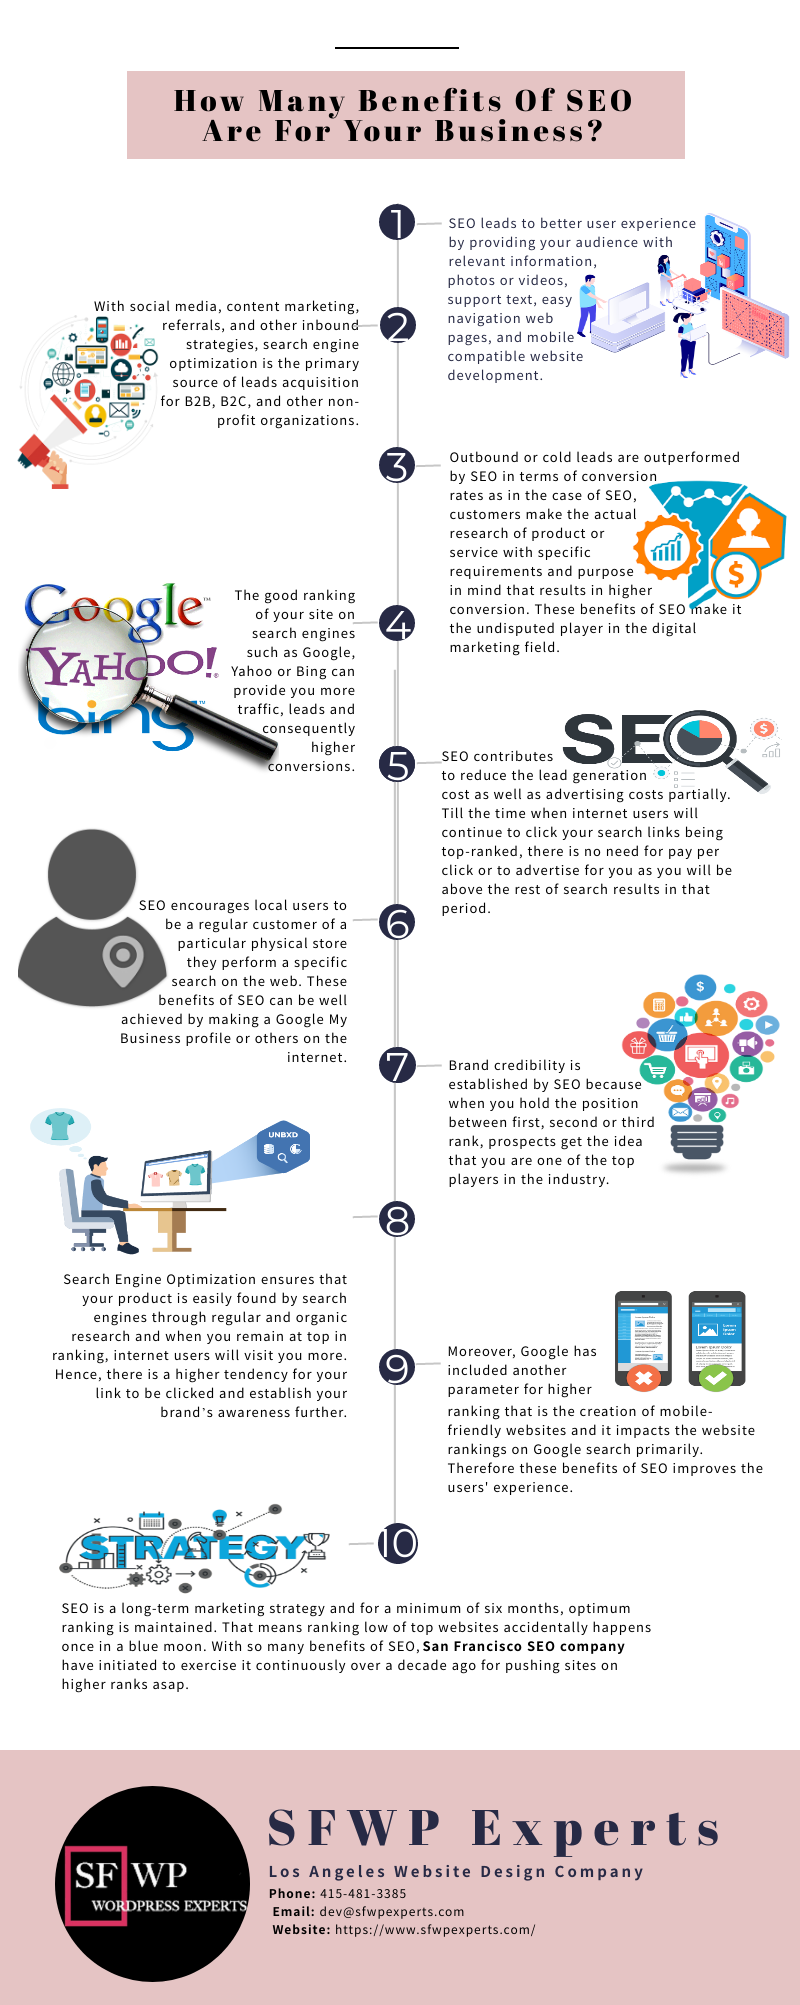 Why Is Seo Important? 30 Powerful Benefits For Any Business thumbnail